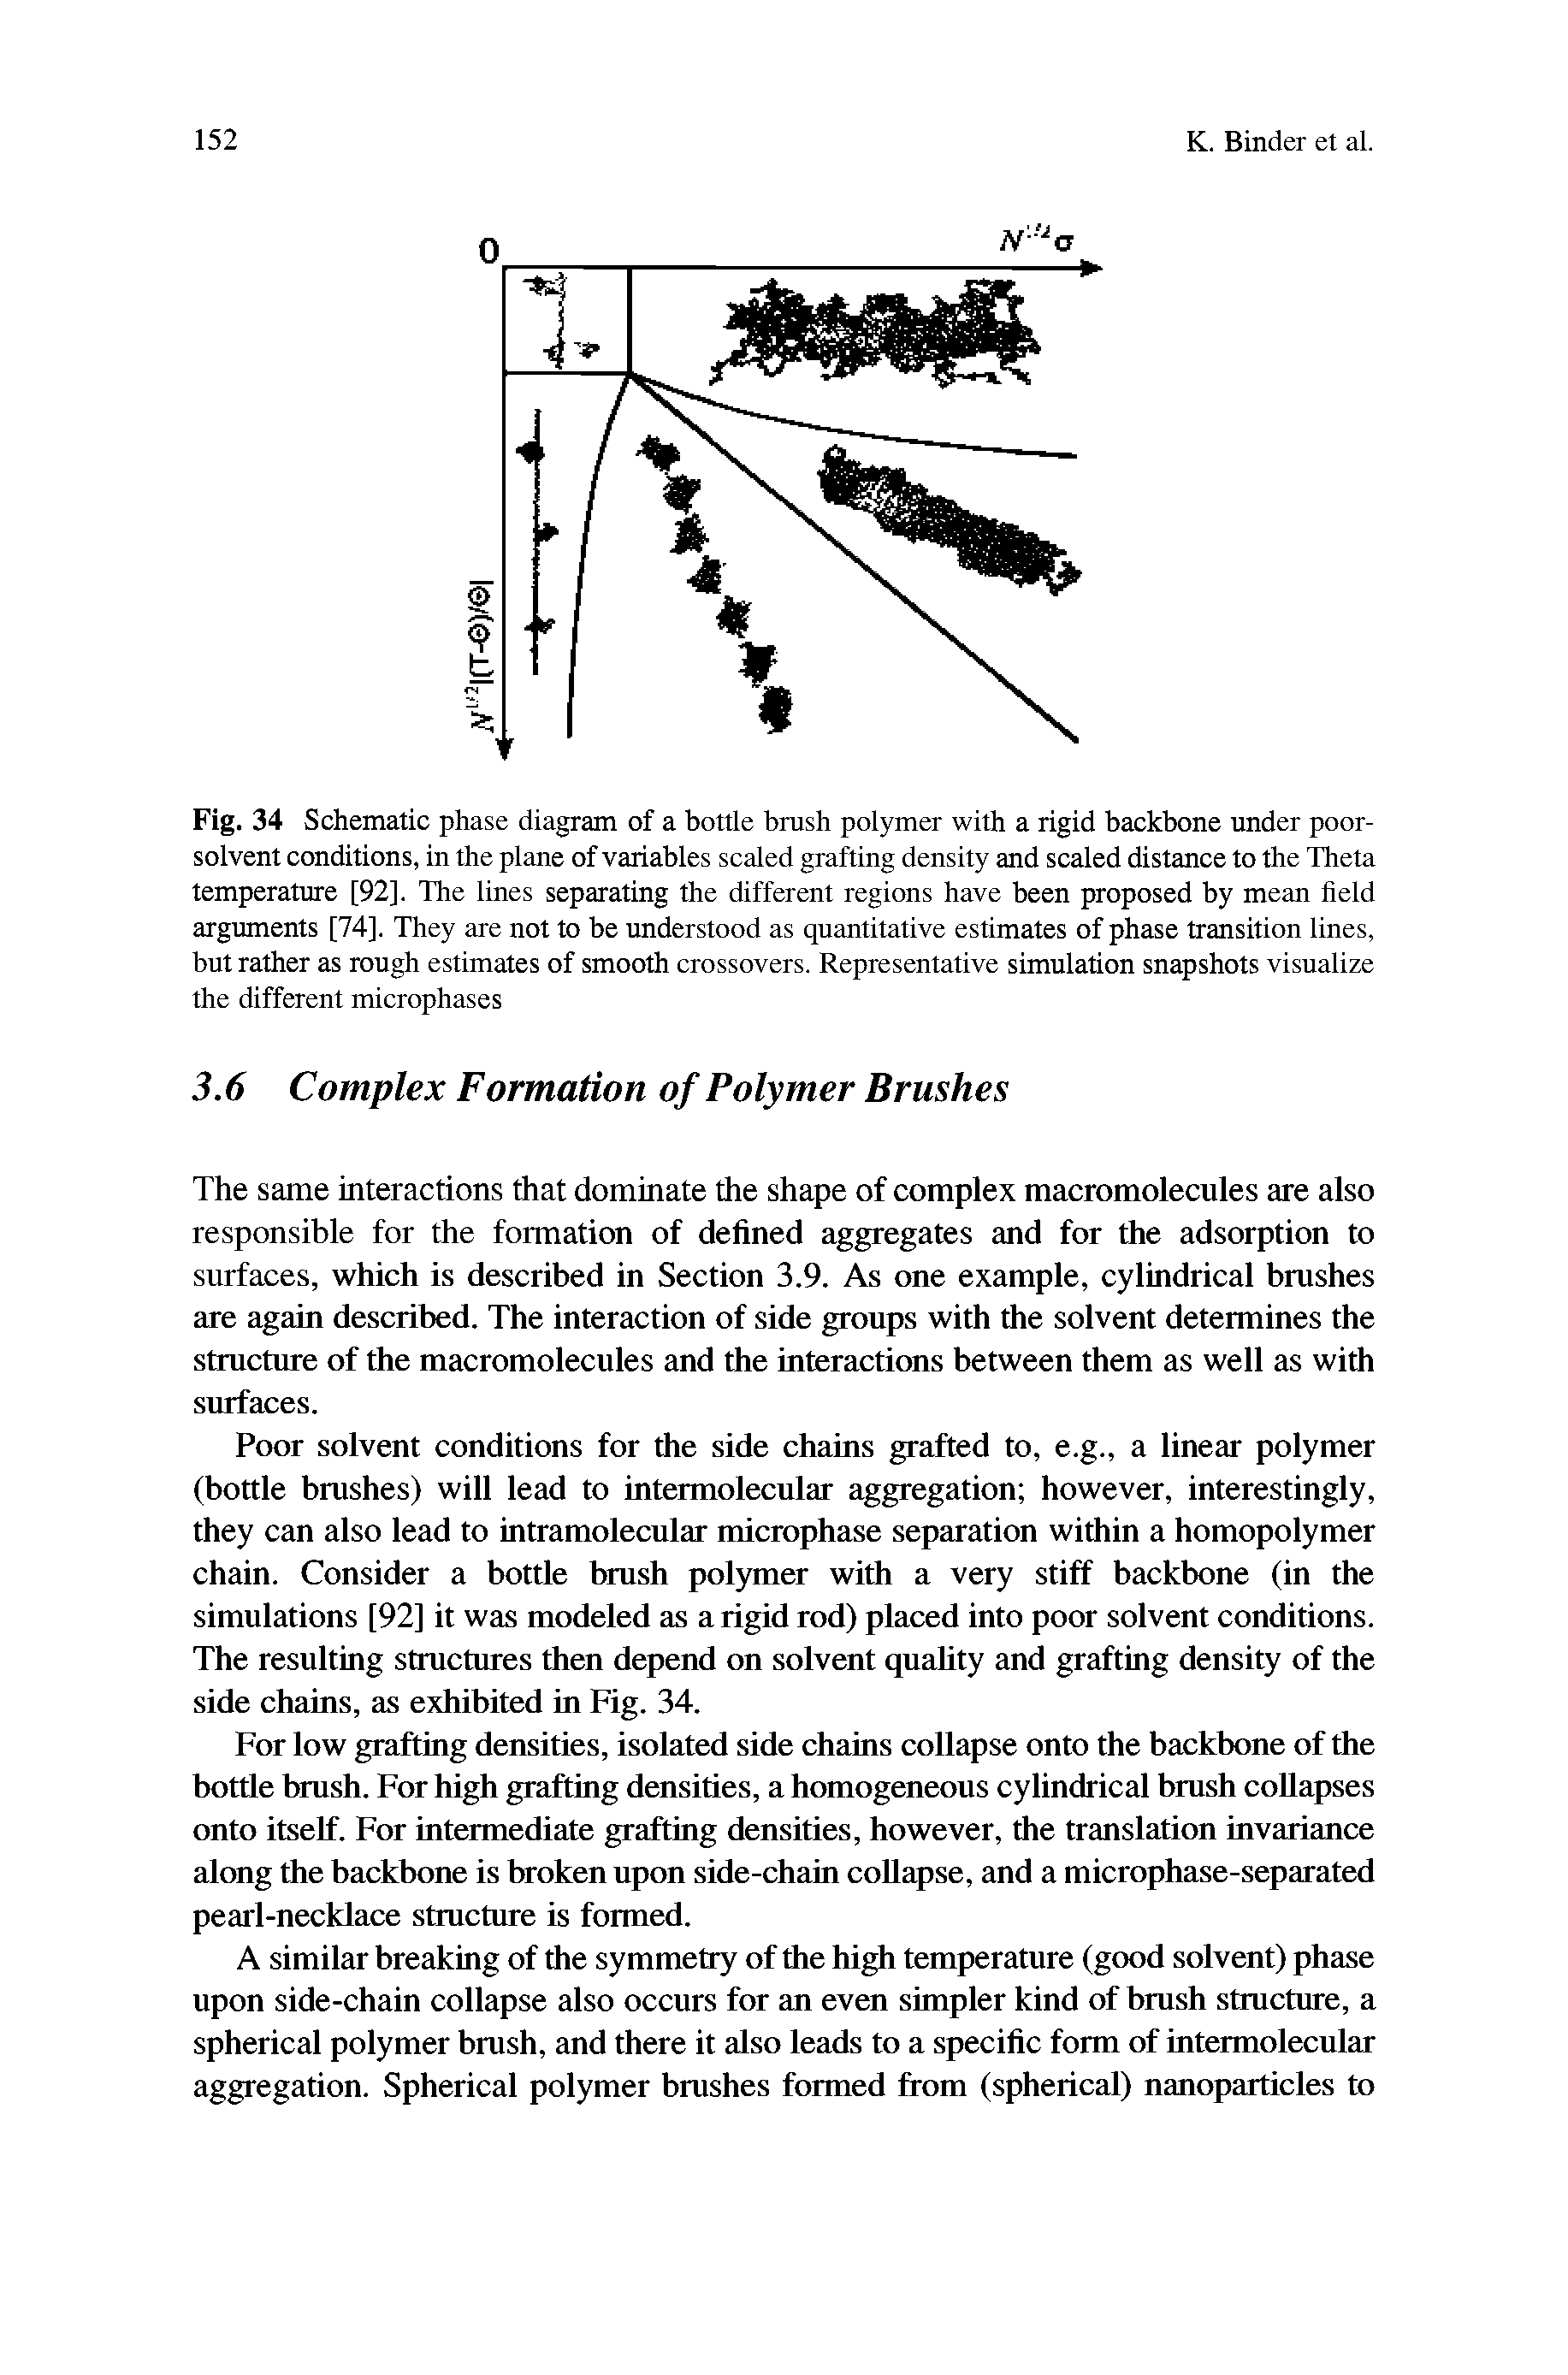 Fig. 34 Schematic phase diagram of a bottle brush polymer with a rigid backbone under poor-solvent conditions, in the plane of variables scaled grafting density and scaled distance to the Theta temperature [92], The lines separating the different regions have been proposed by mean field arguments [74], They are not to be understood as quantitative estimates of phase transition lines, but rather as rough estimates of smooth crossovers. Representative simulation snapshots visualize the different microphases...